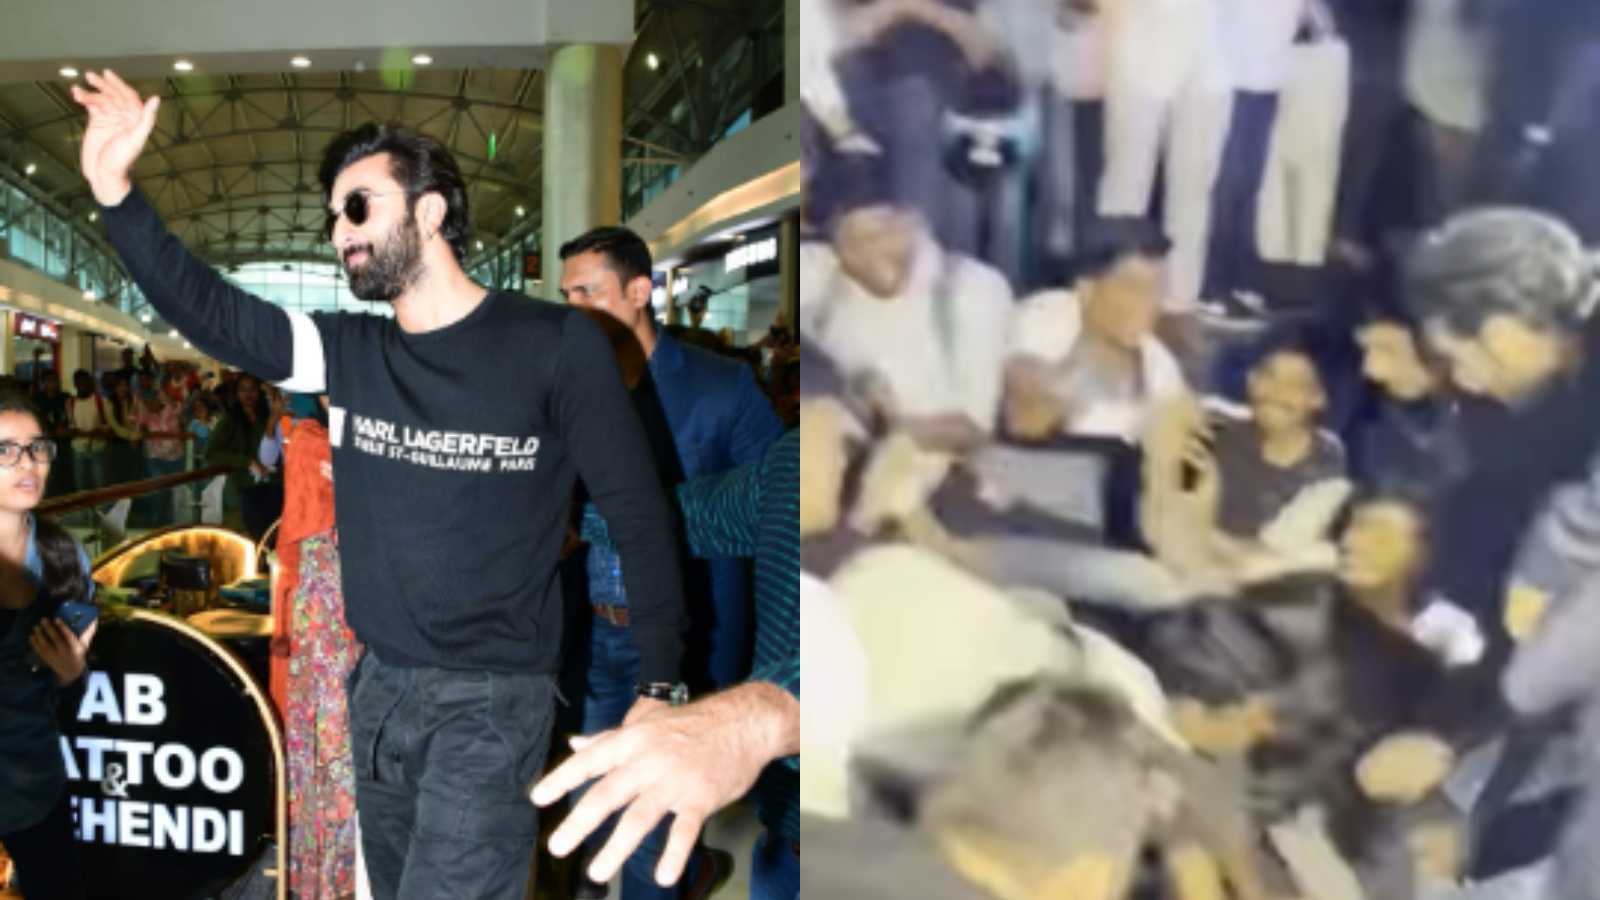 'He is not Salman or Shah Rukh' : Netizens take a dig at the maddening craze surrounding Ranbir Kapoor at an event